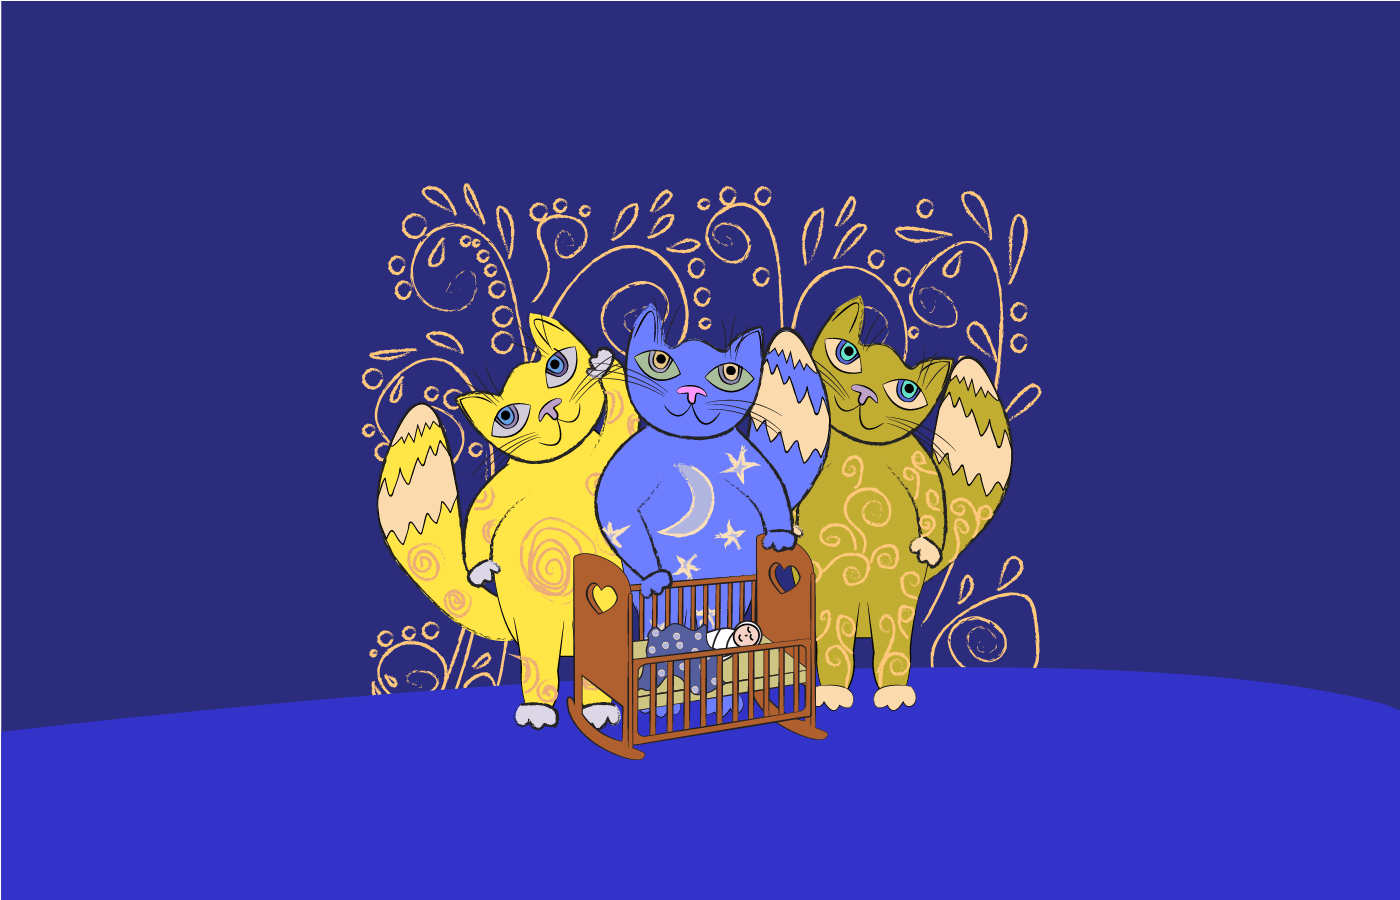 drawing of three cats standing at the baby craddle